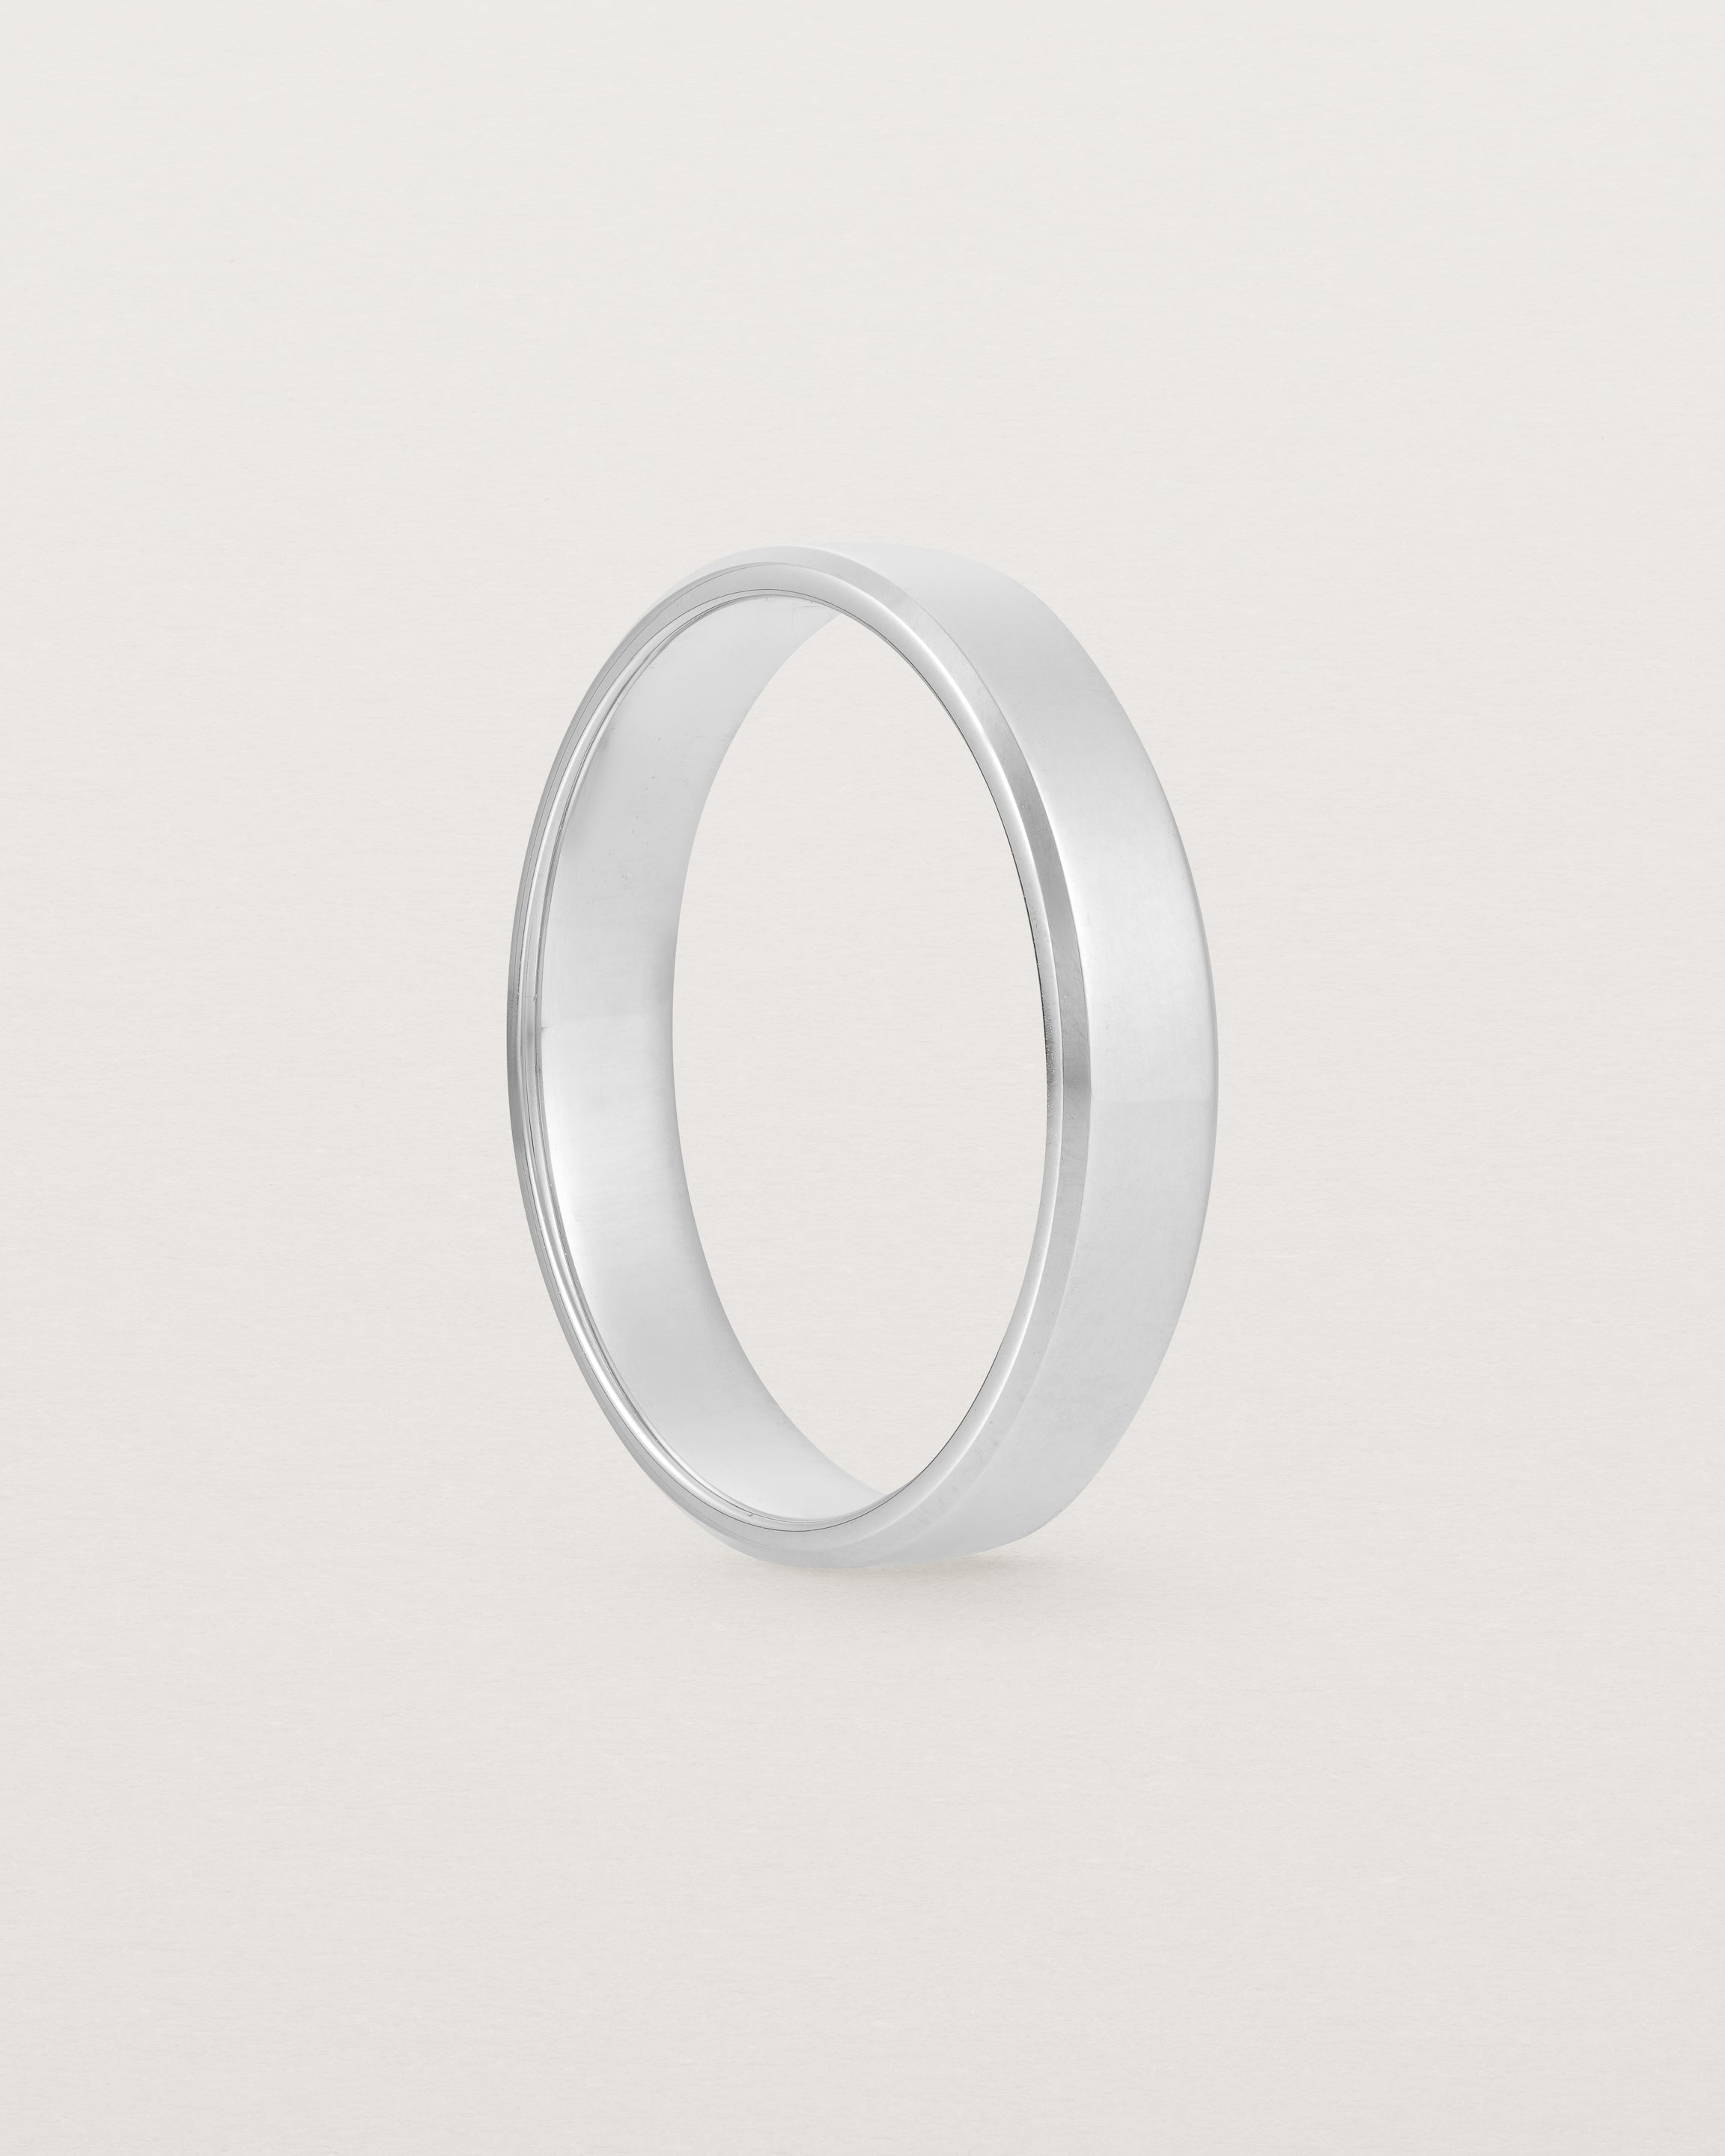 4mm white gold wedding band with a chamfered edge